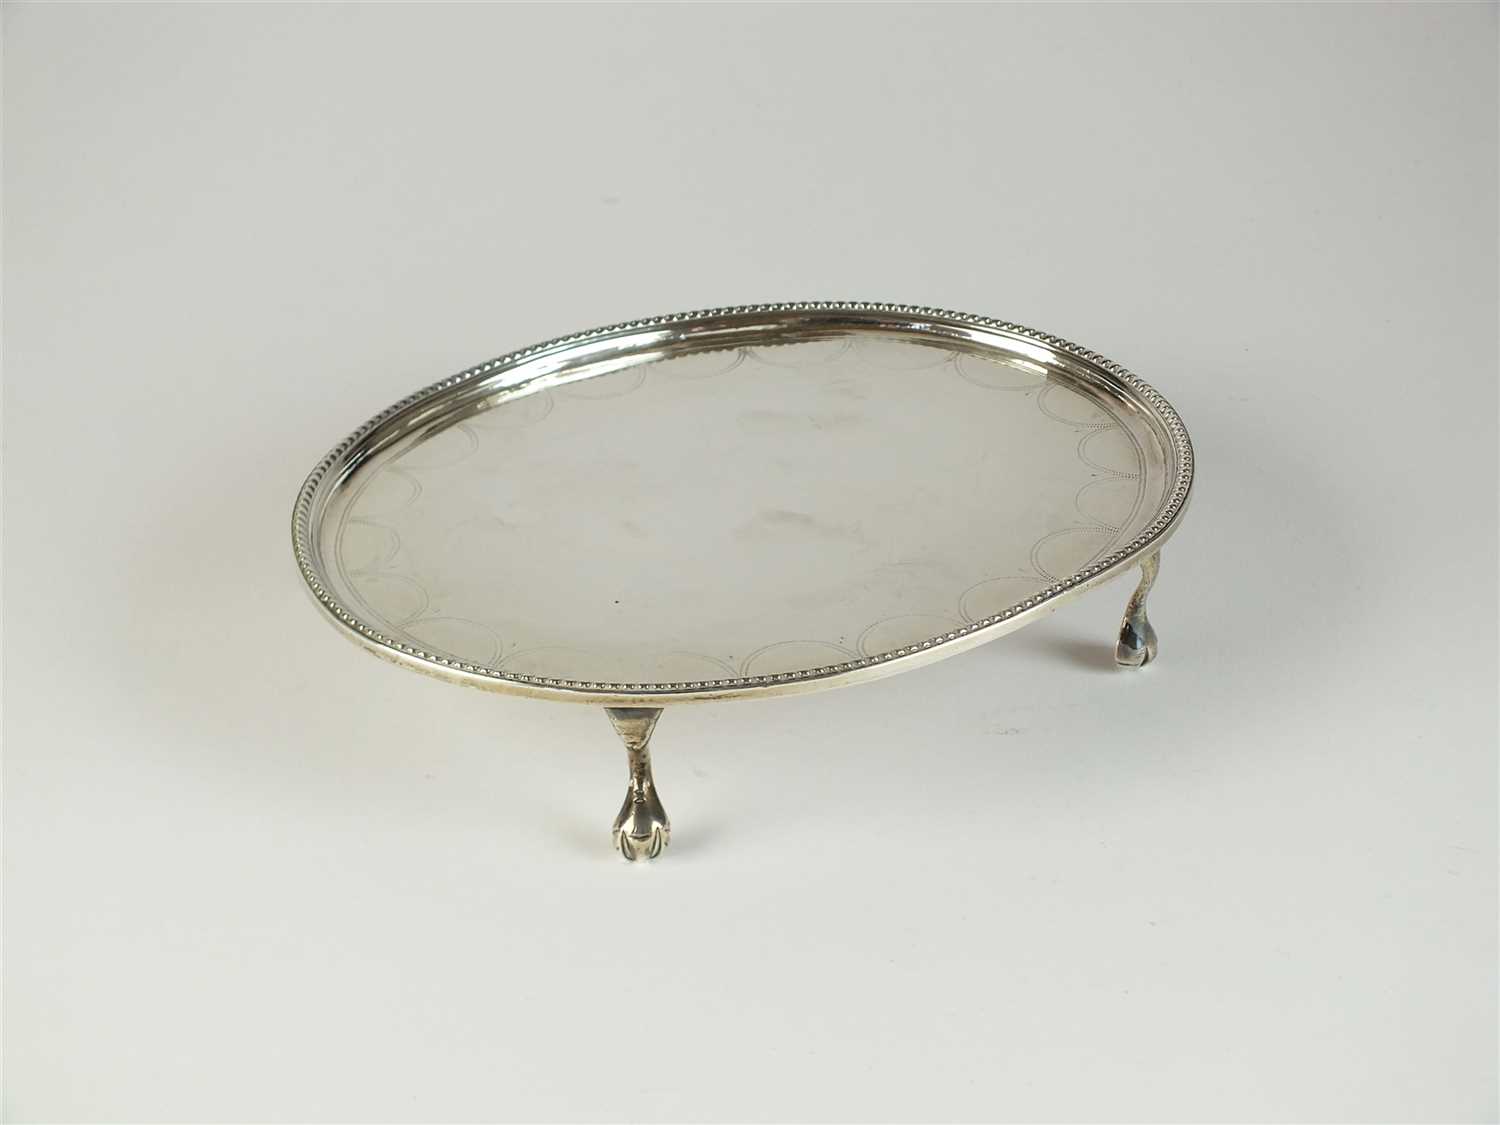 A mid-late 18th century Scottish silver teapot stand